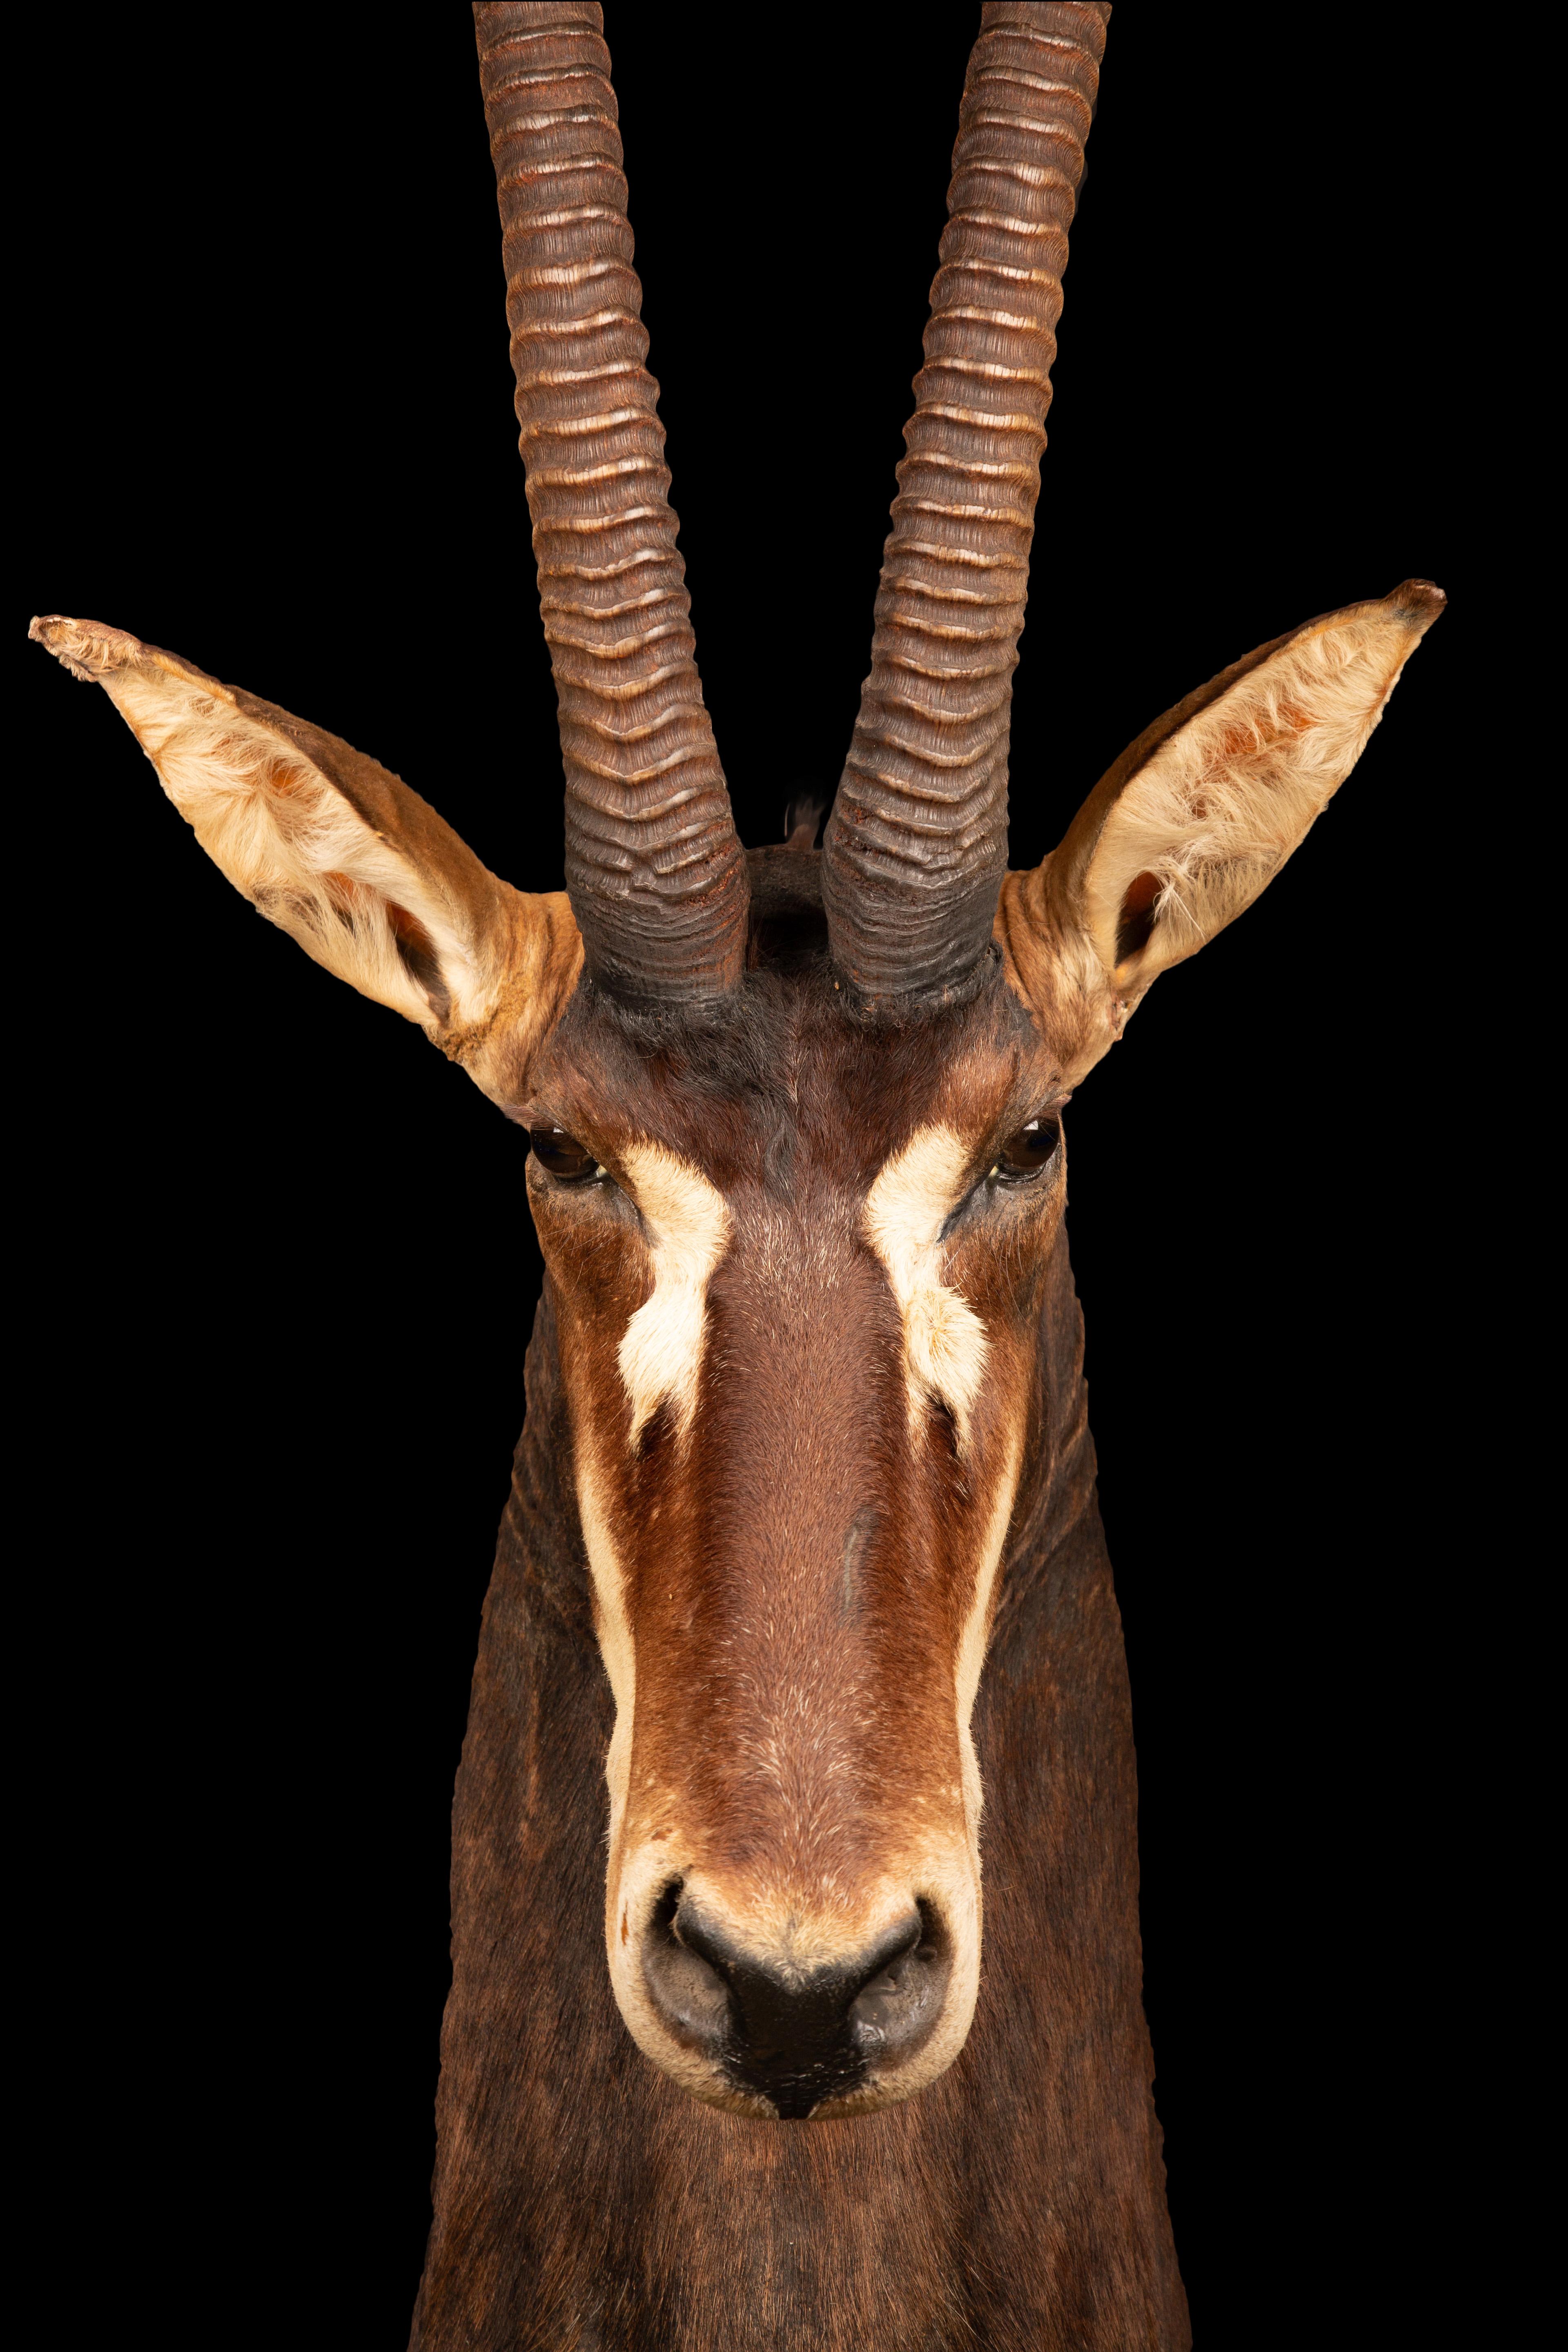 This exquisite specimen features a table mount taxidermy Sable Antelope, expertly crafted and beautifully preserved. The Sable Antelope is a stunning species that inhabits the wooded savannas of East and Southern Africa, from the south of Kenya to